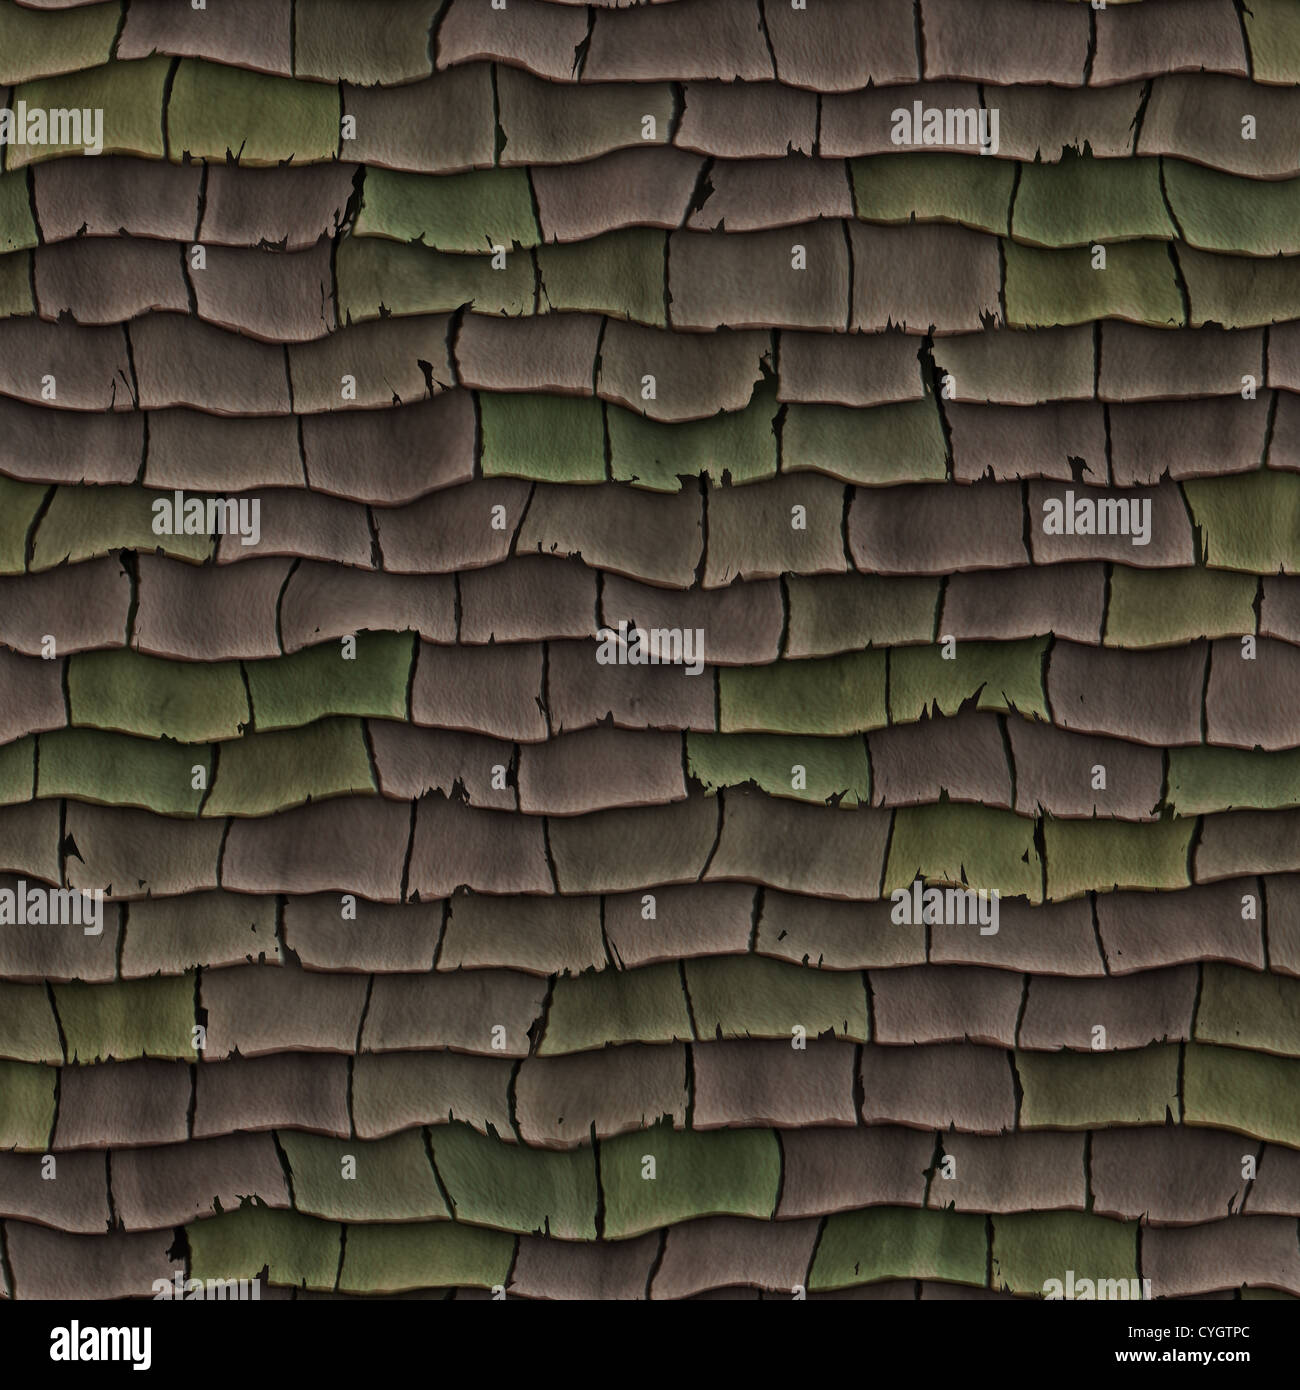 High quality seamless old roof shingles background Stock Photo